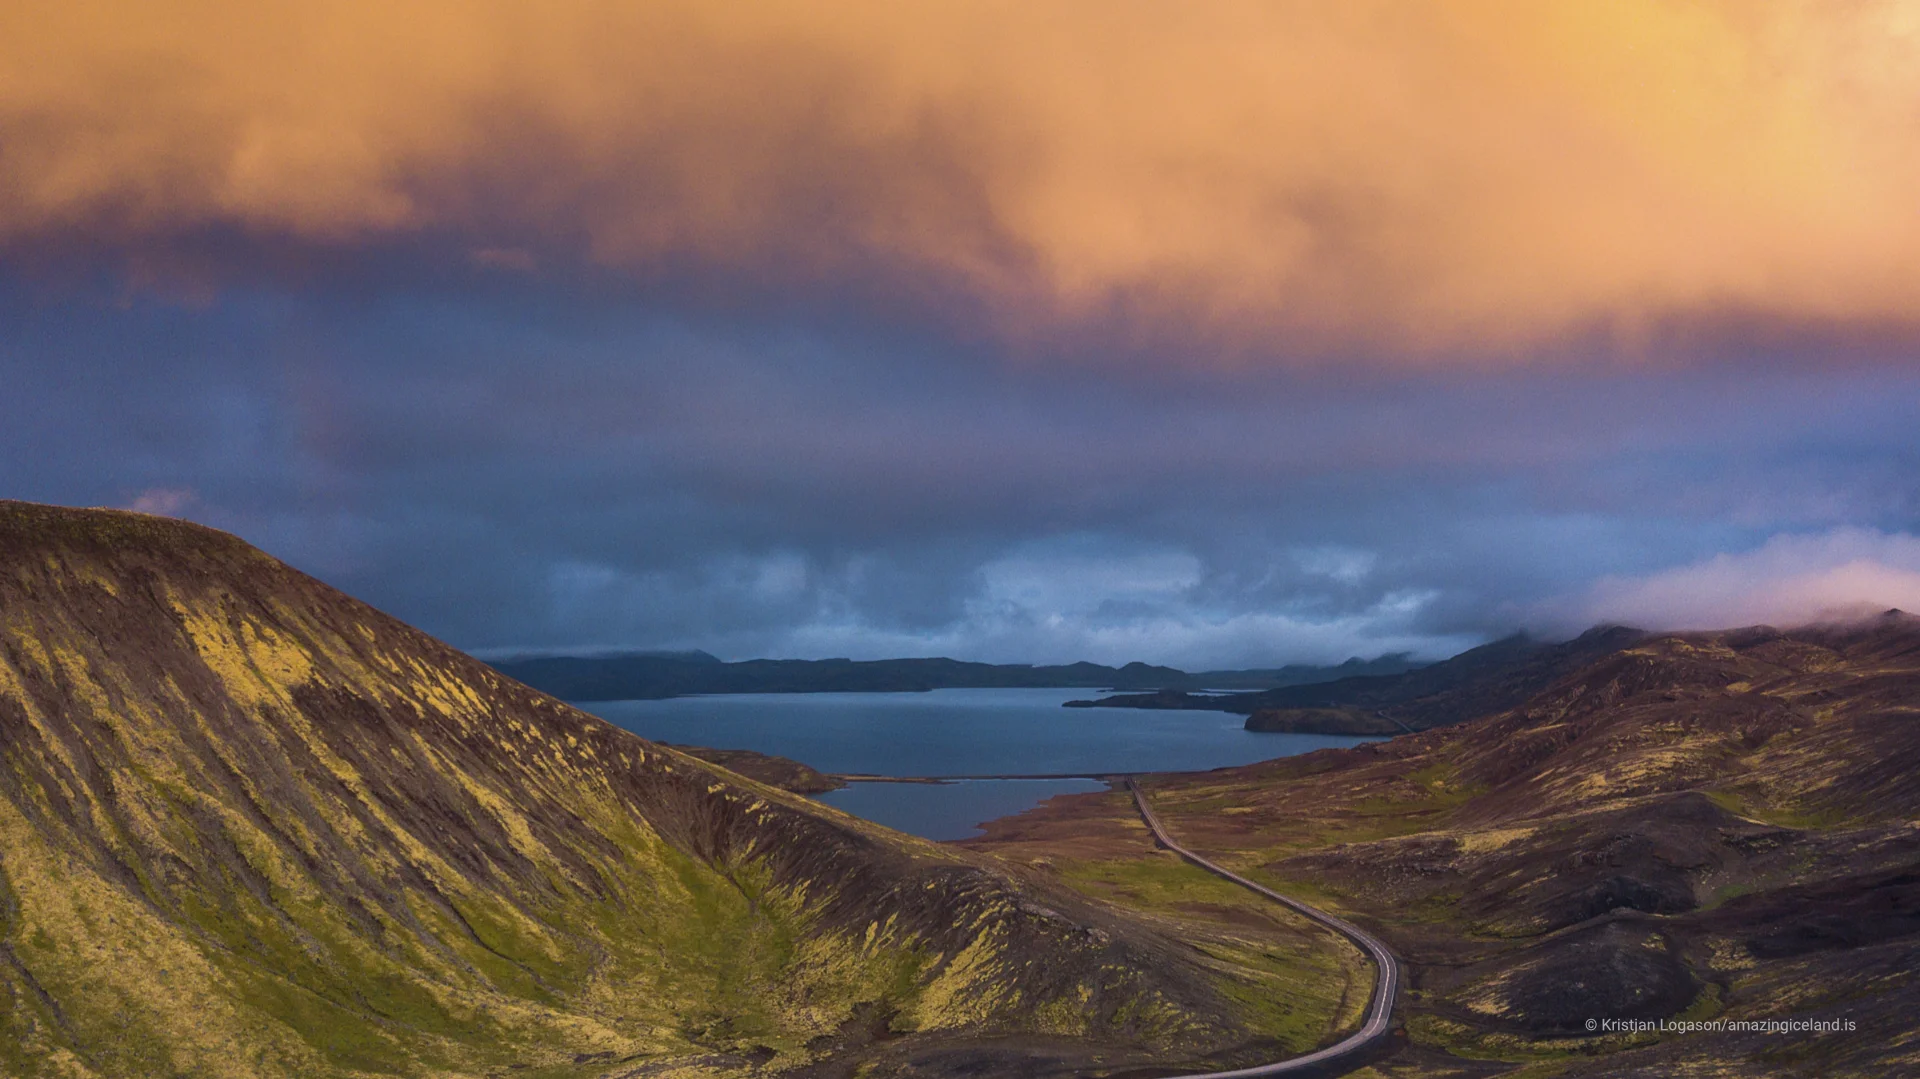 Birds eye view of the road to Kleifarvatn, the largest lake on the Reykjanes Peninsula